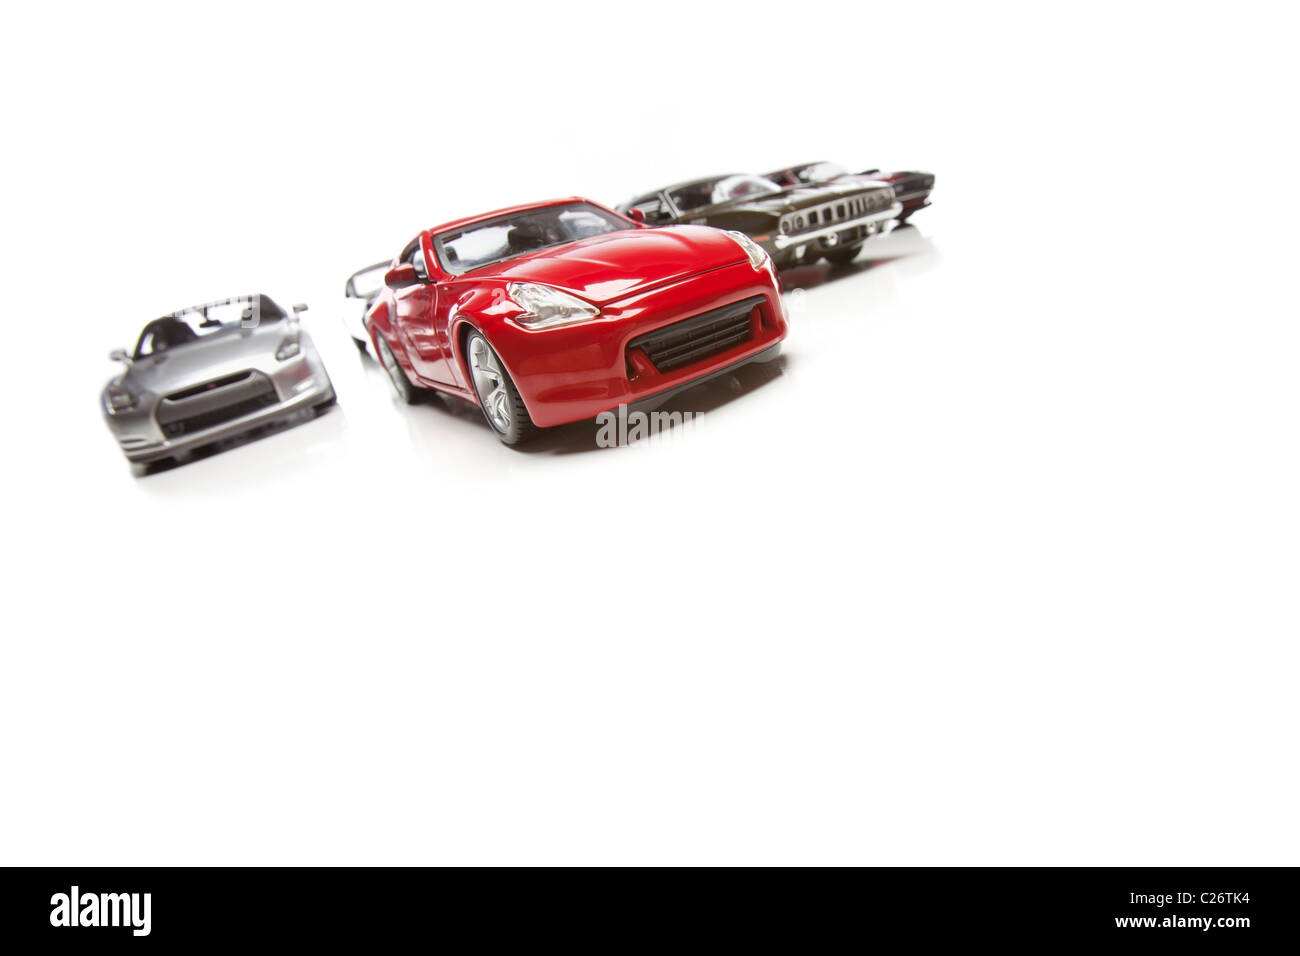 Several Sports Cars Racing Isolated on a White Background. Stock Photo